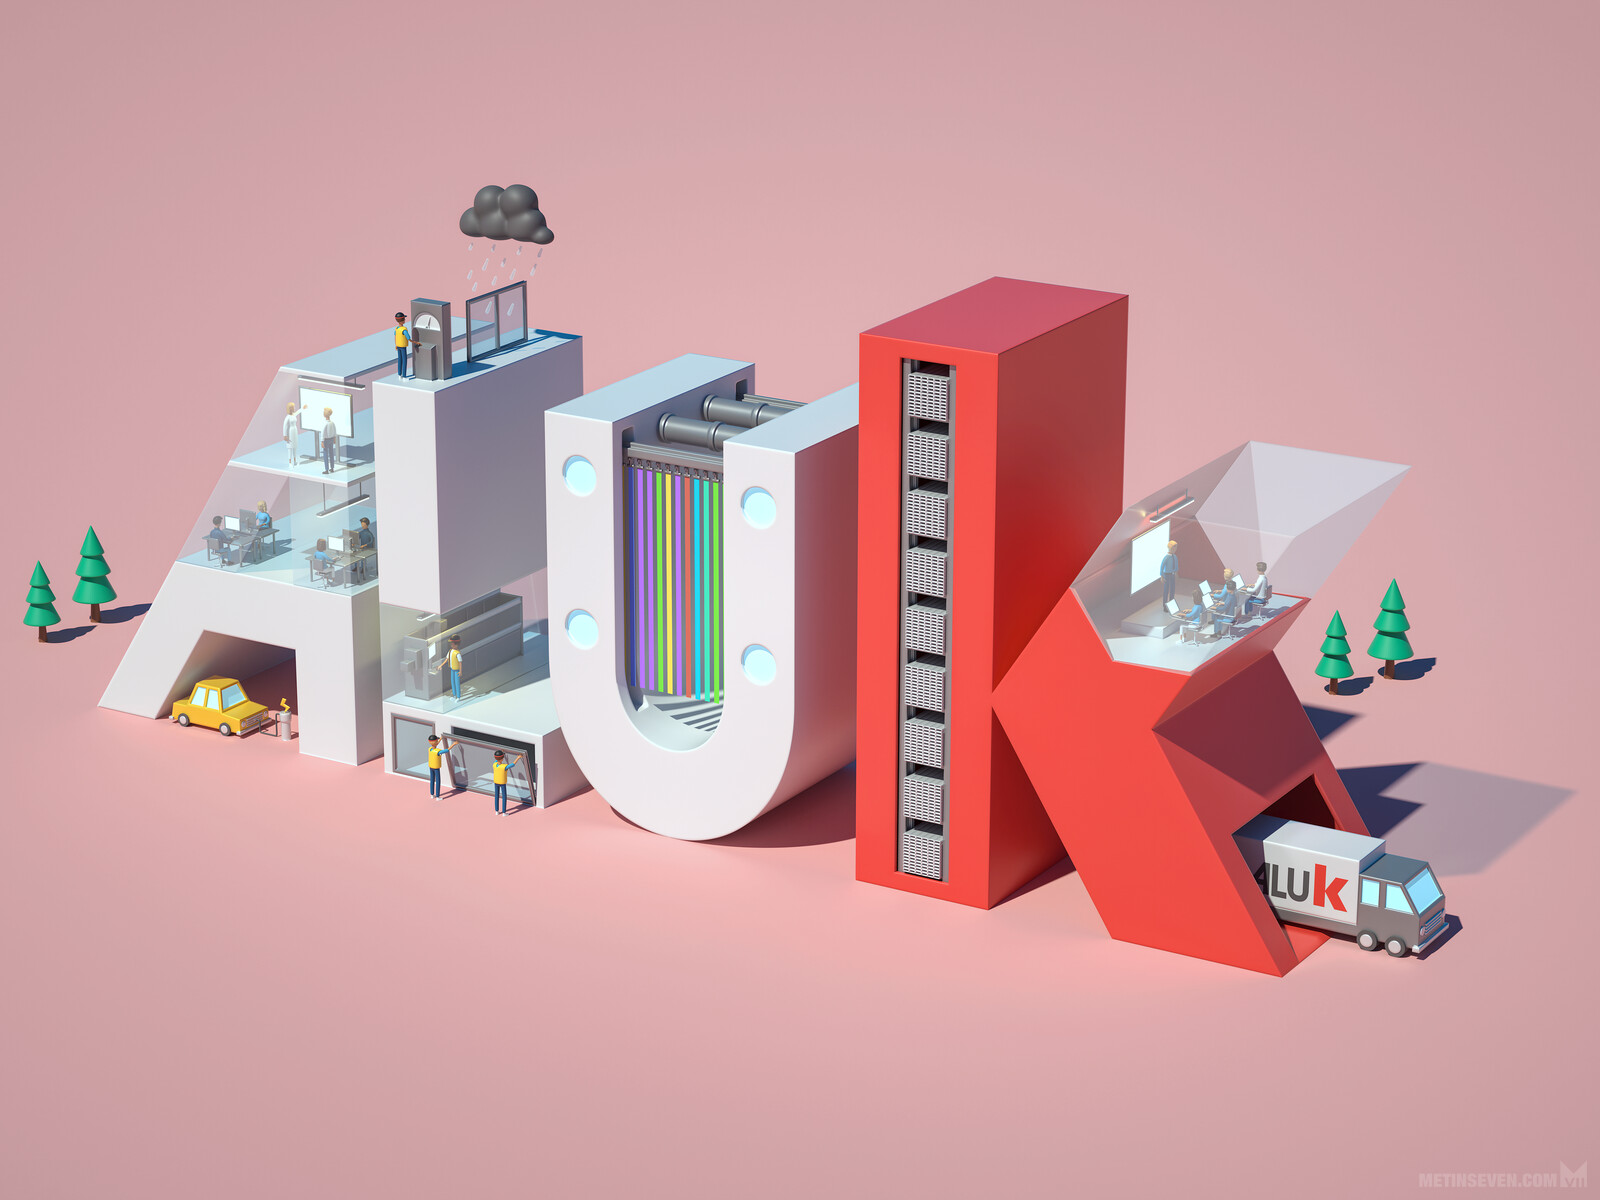 Stylized 3D illustration for ALUK, a British manufacturer of aluminium construction systems